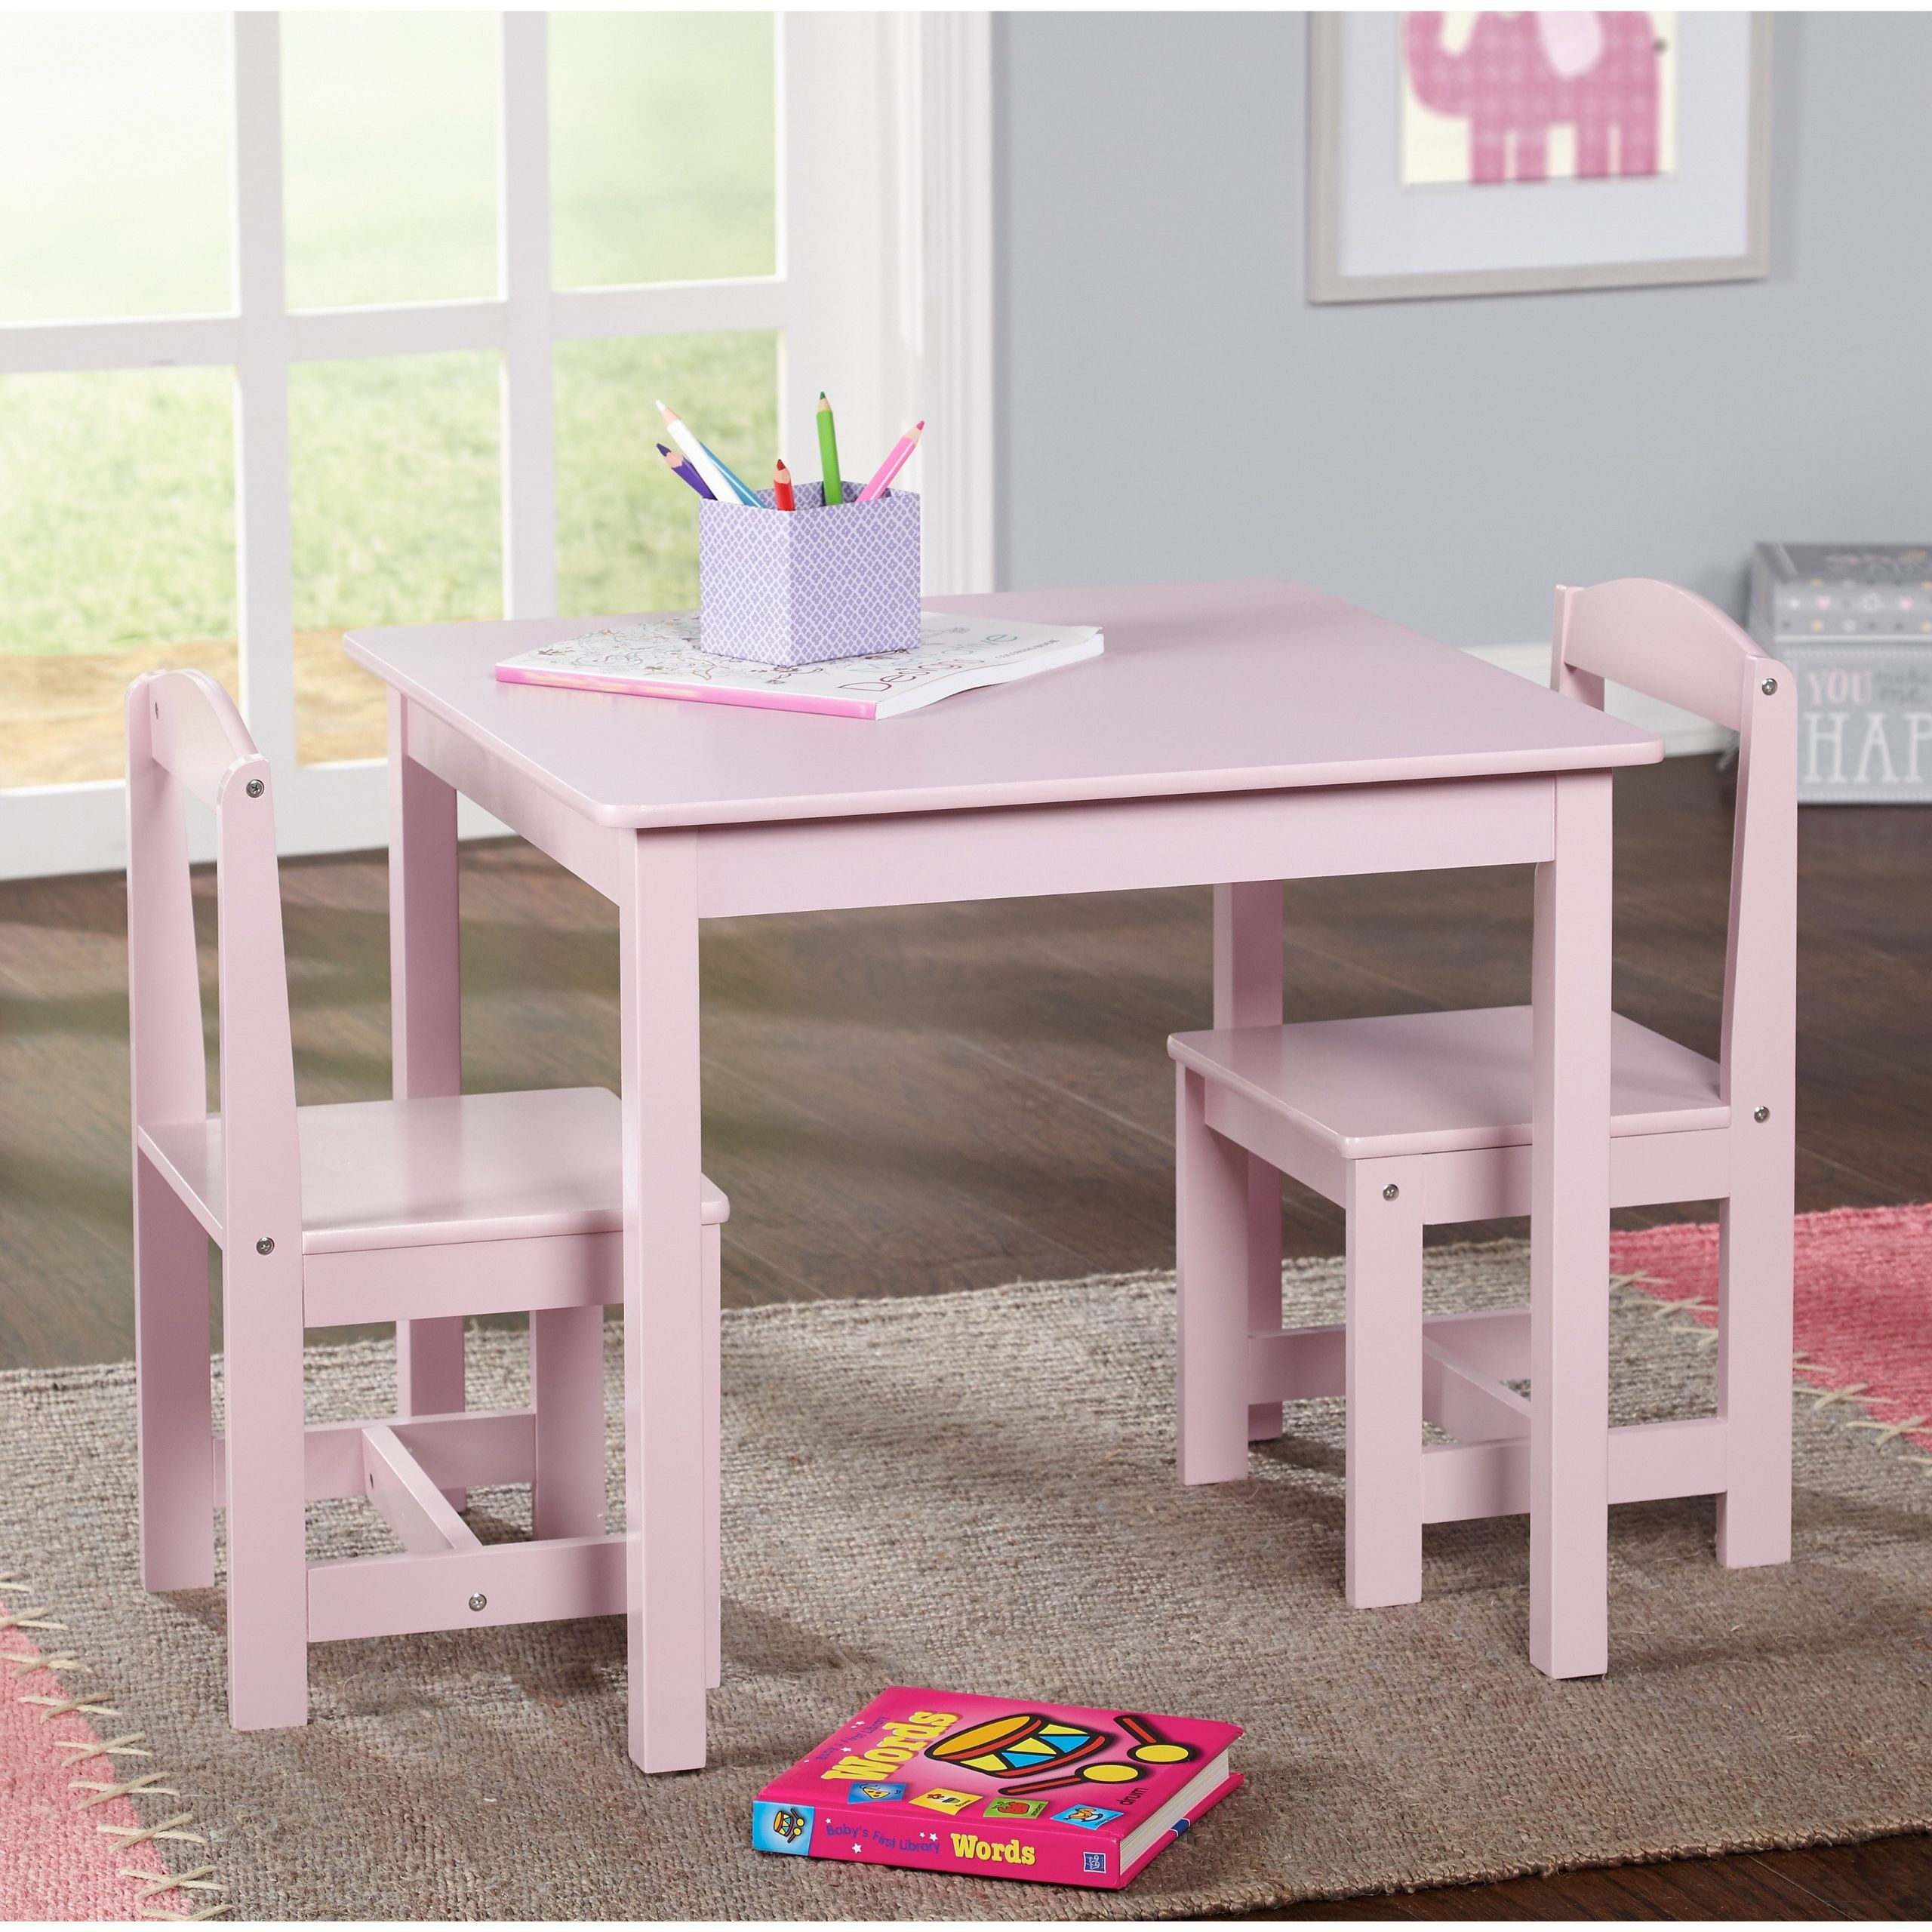 Kids Craft Table And Chairs
 Kids Craft Table Modern And Chairs Children Activity